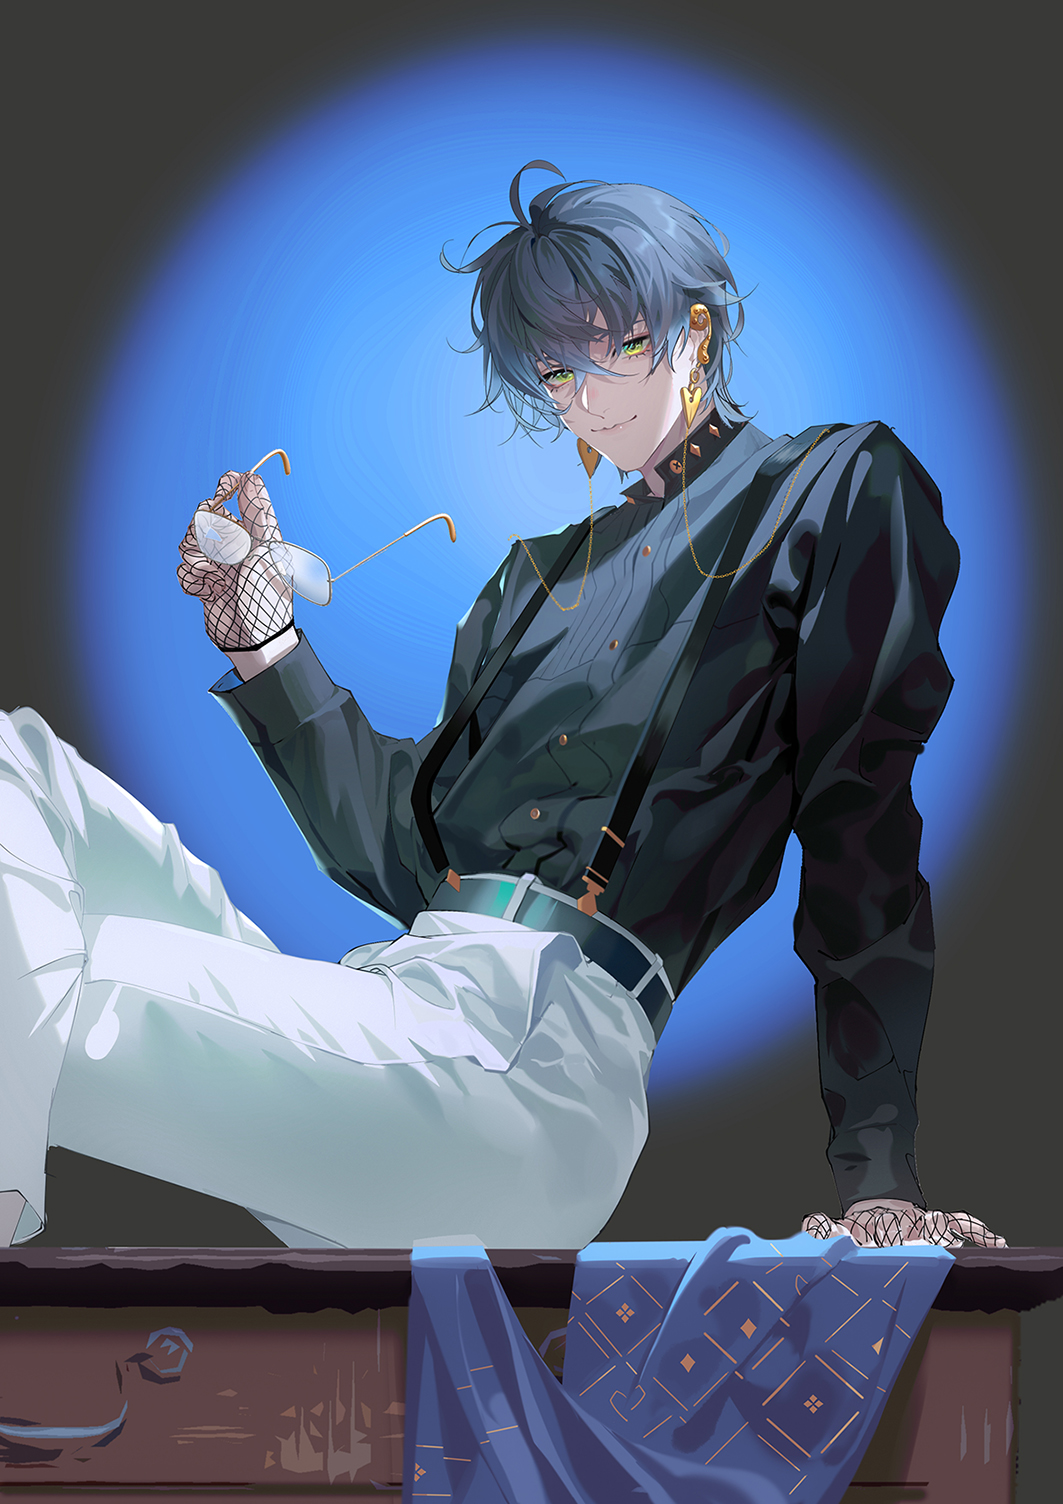 AI Art Generator Blue hair anime Guy with grey shirt and sweat pants with  wings black book cover